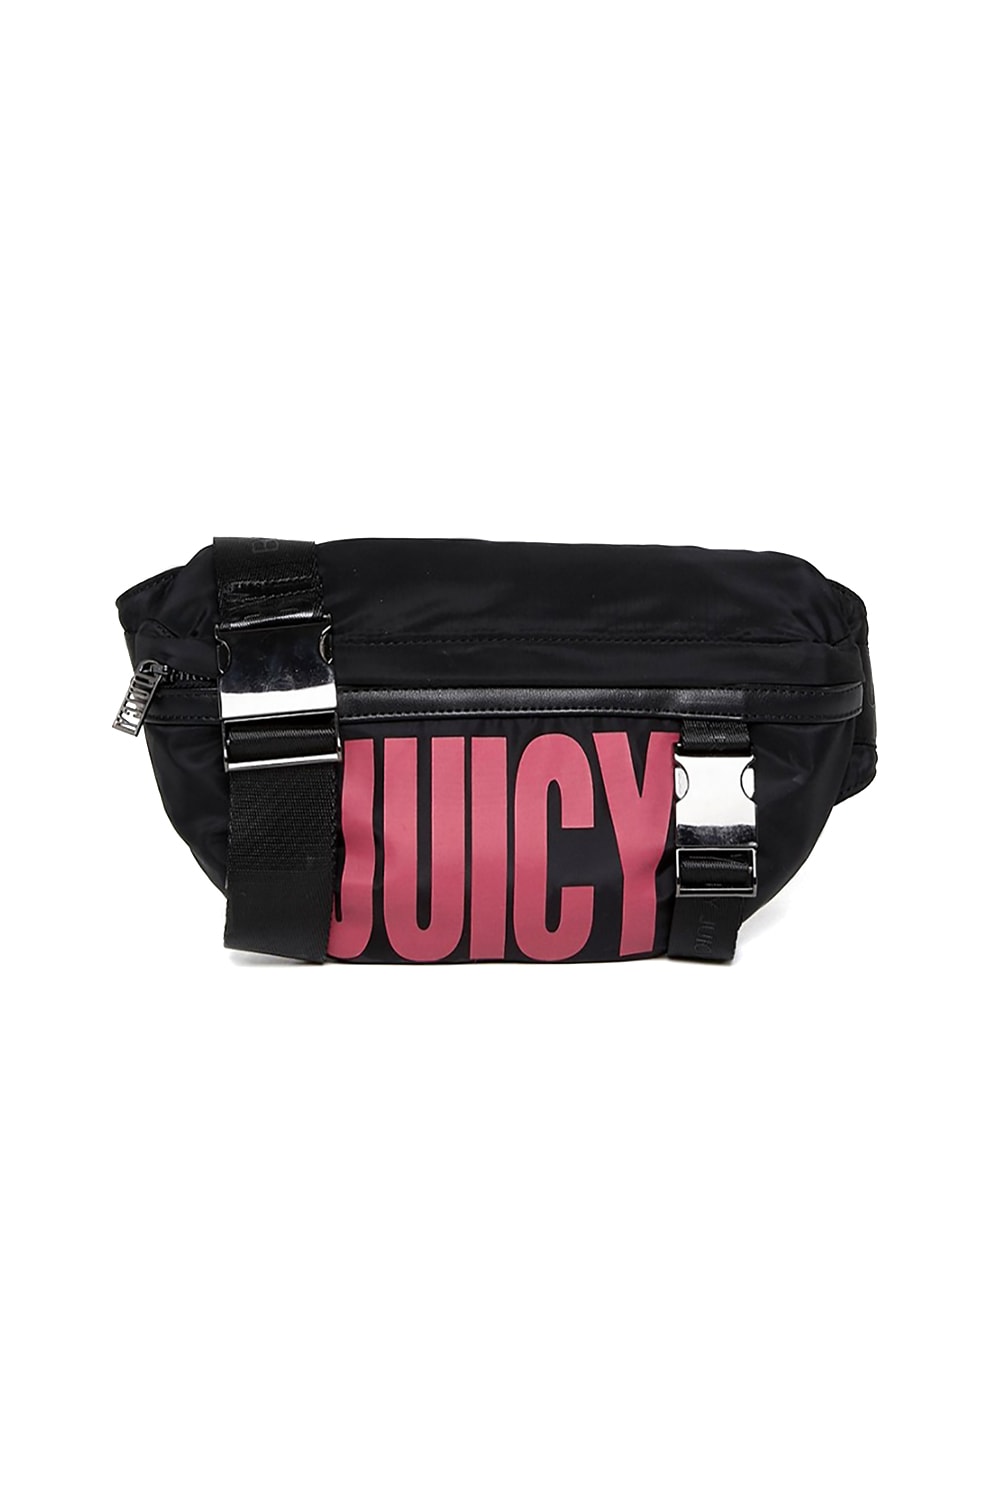 Juicy Couture Retro '90s Logo Bumbag Black Pink Fanny Pack 1990s 2000s '00s ASOS